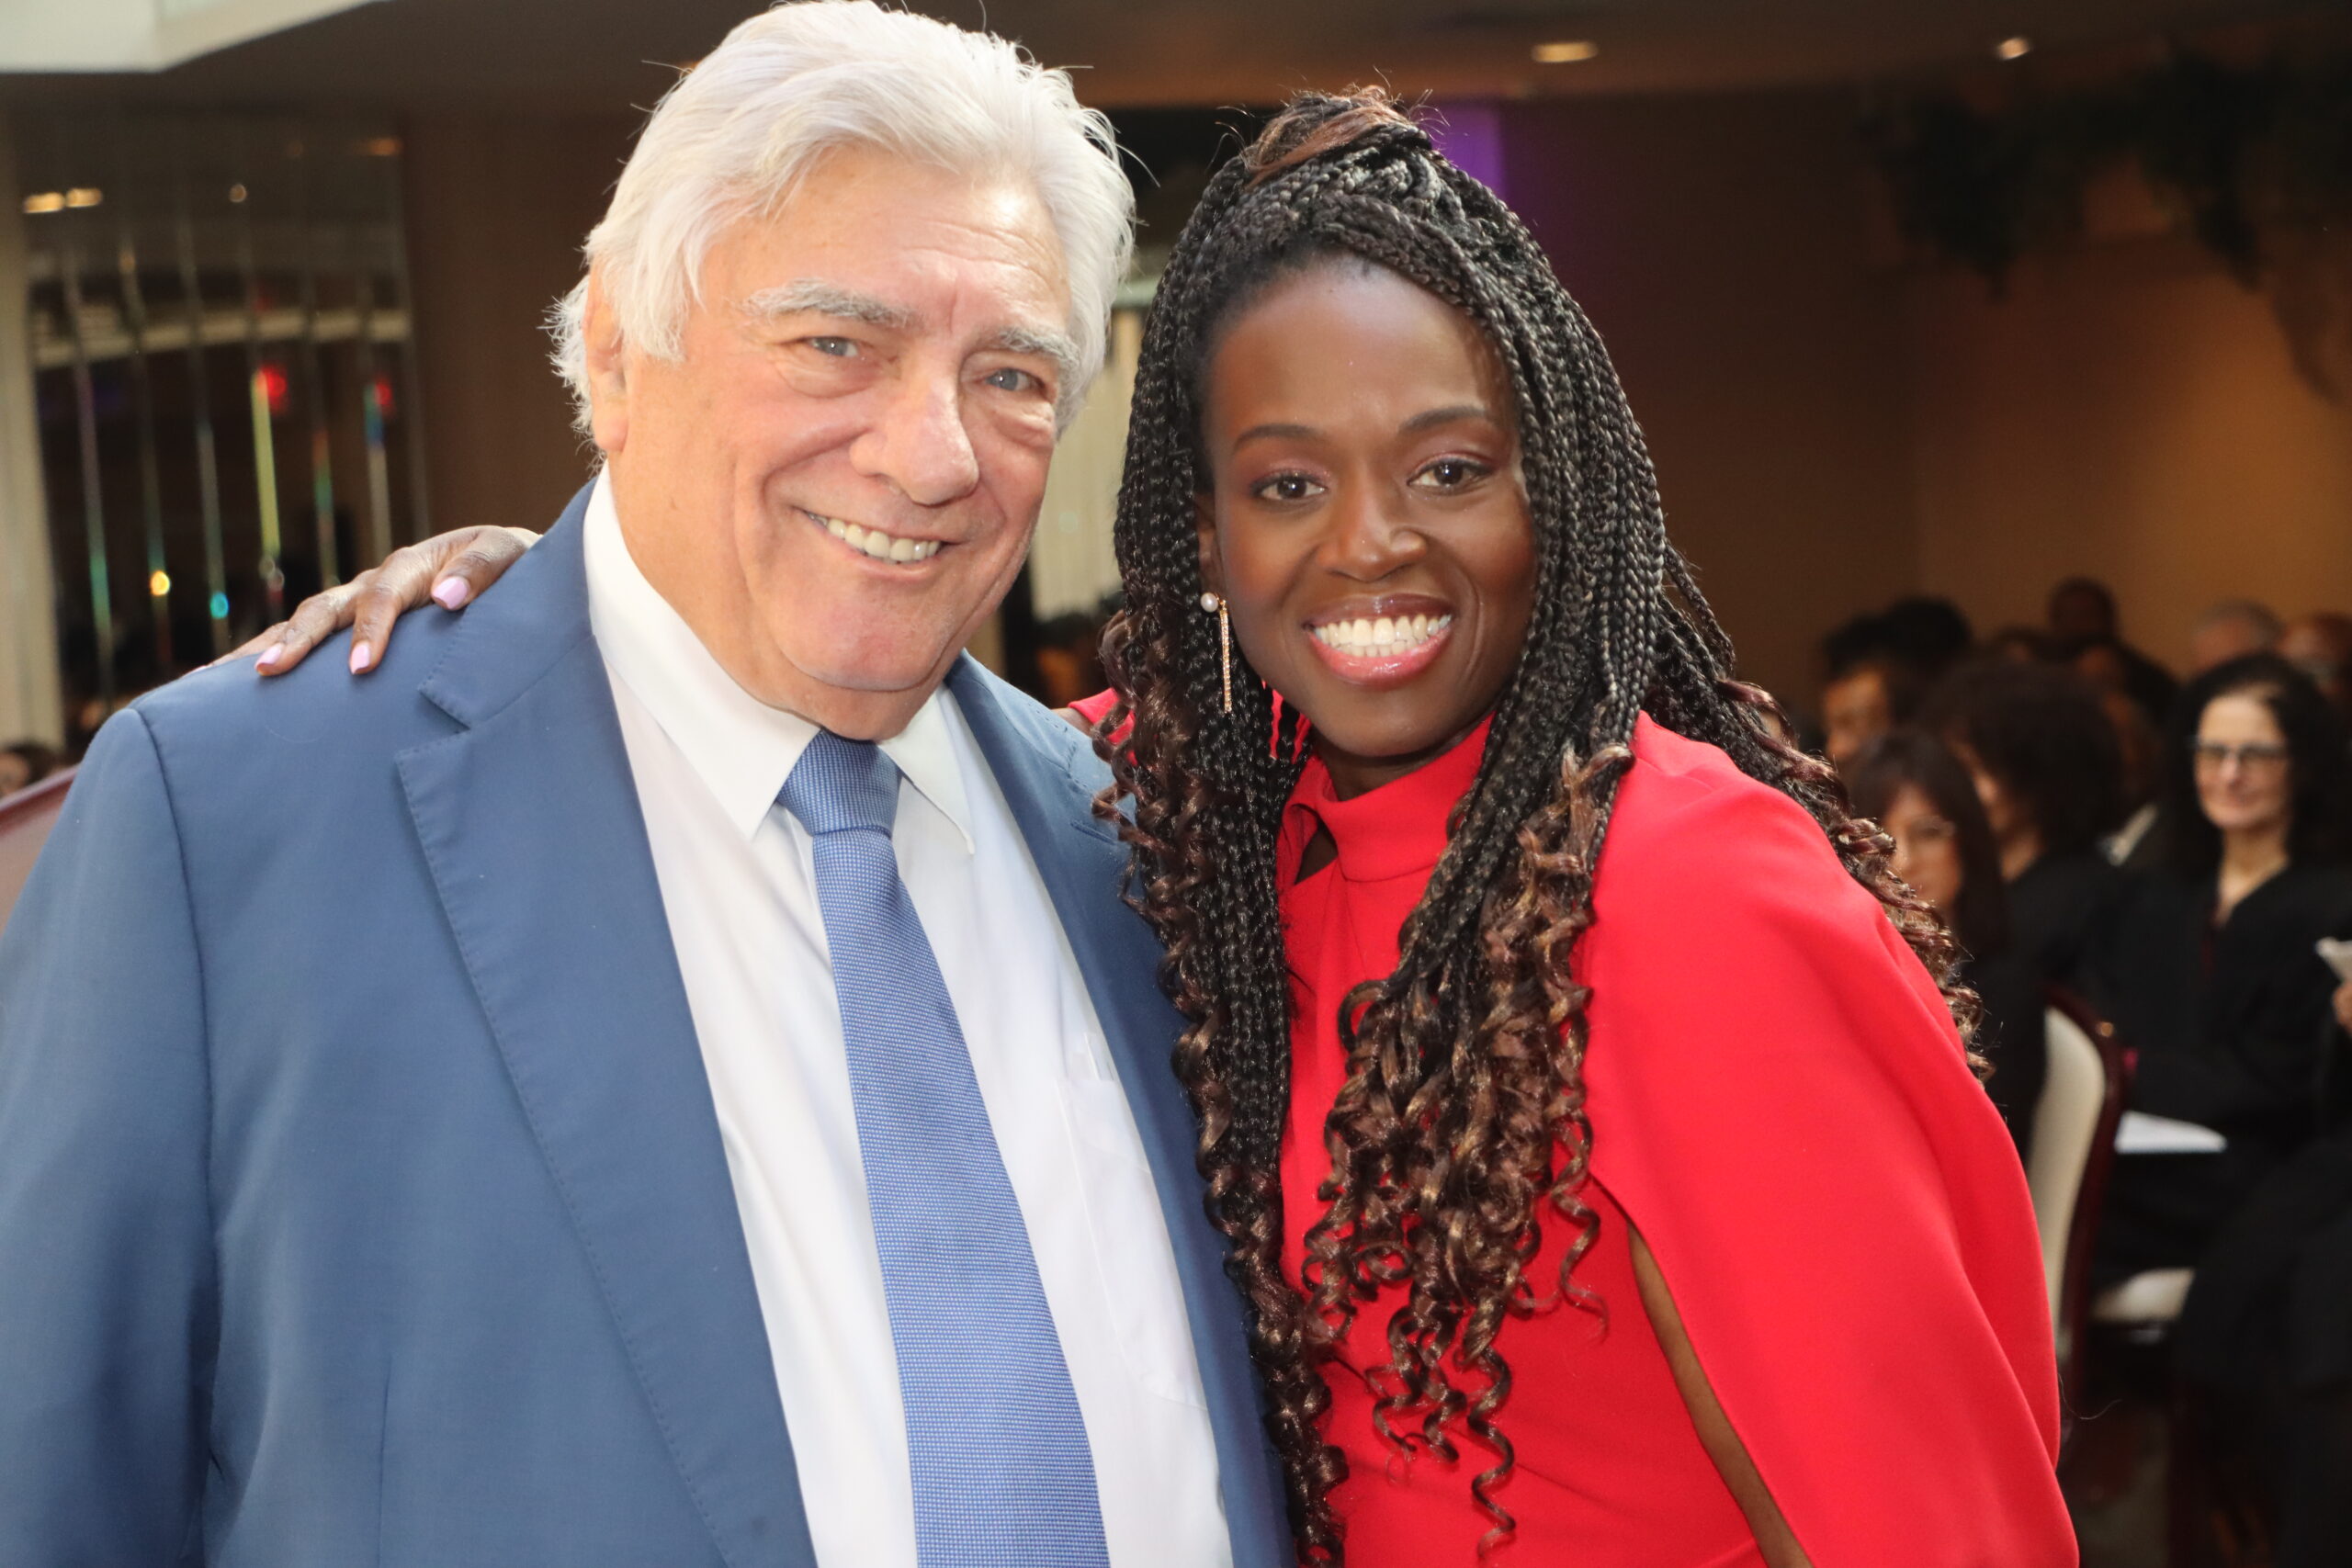 Judge Jean-Jacques shares a moment with Hon. Frank Seddio, who announced that this could be the final induction ceremony he attends in person.